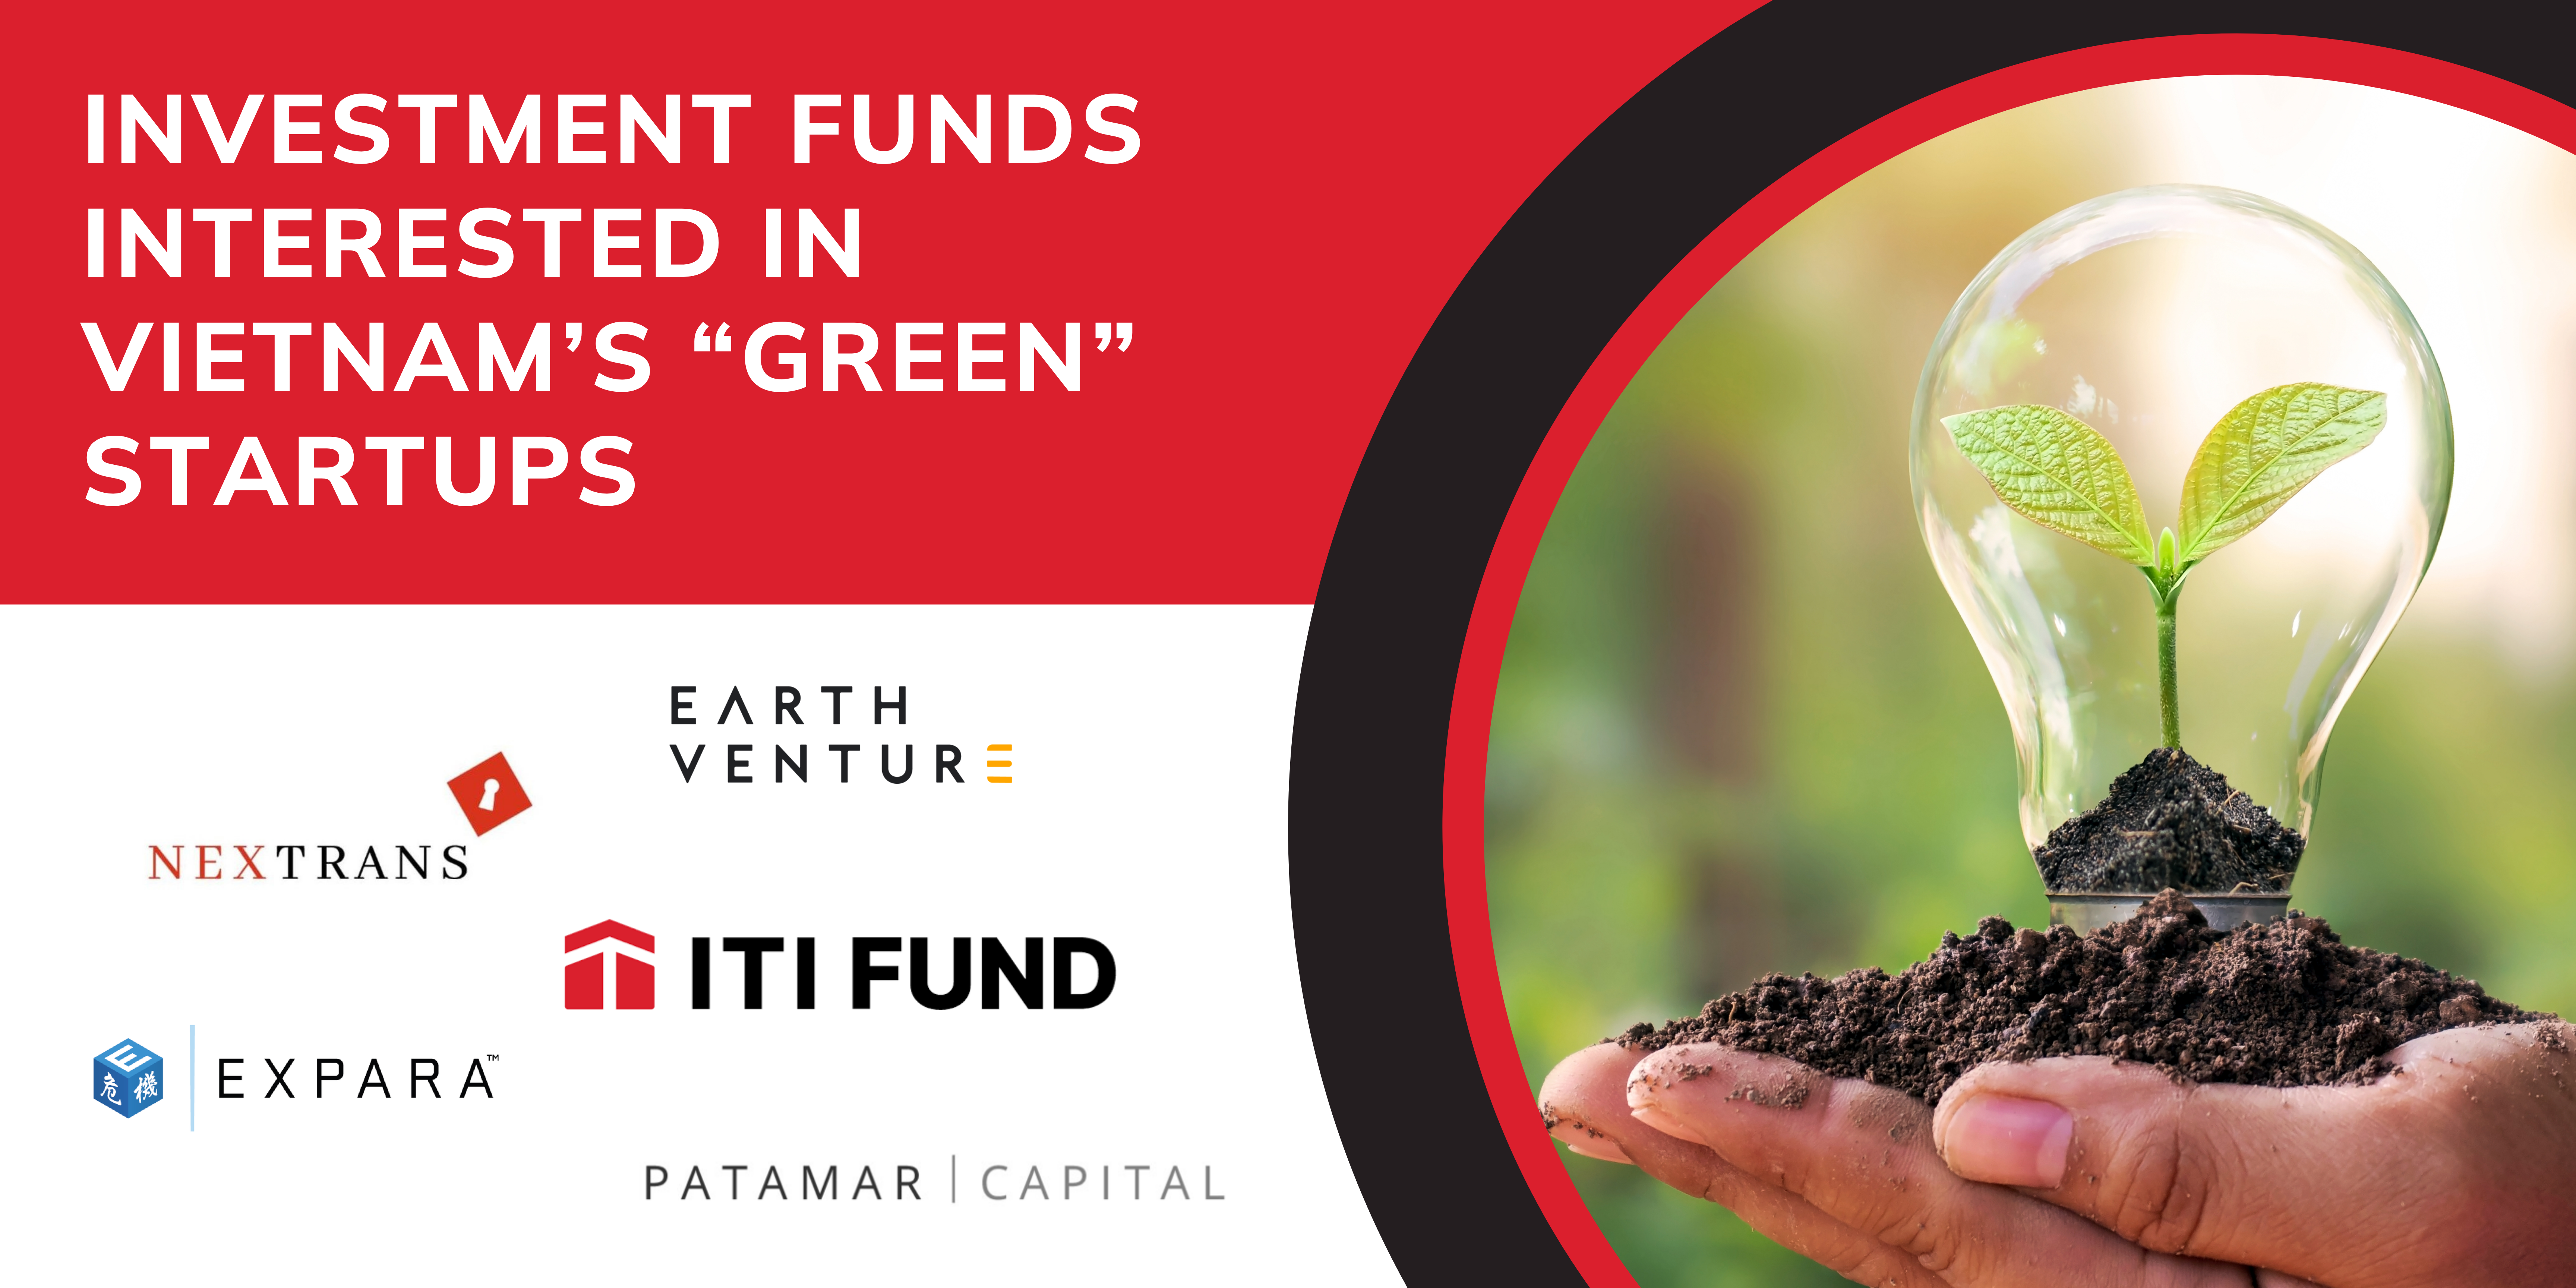 ITI FUND_INVEST IN GREEN STARTUPS